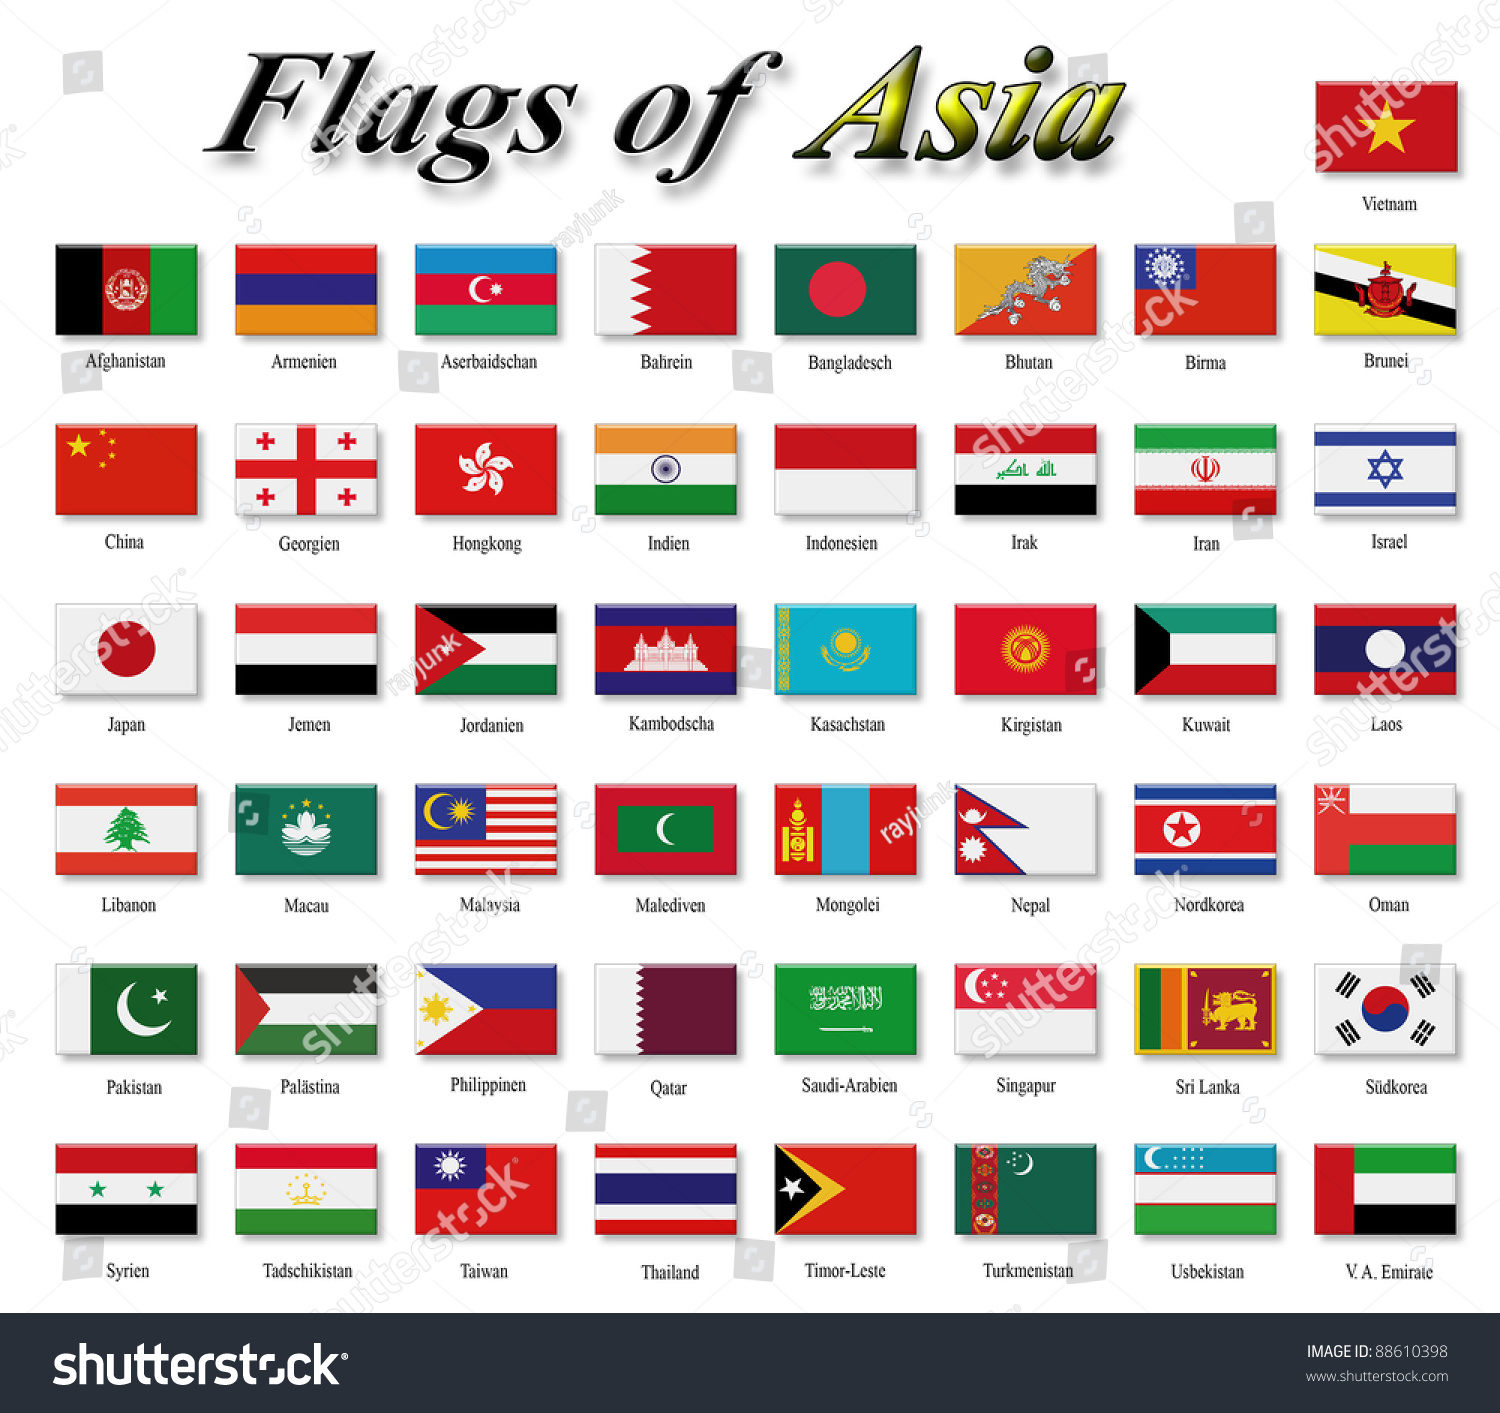 Hide Asia's Flags by Capital, Minefield Quiz - By timmylemoine1